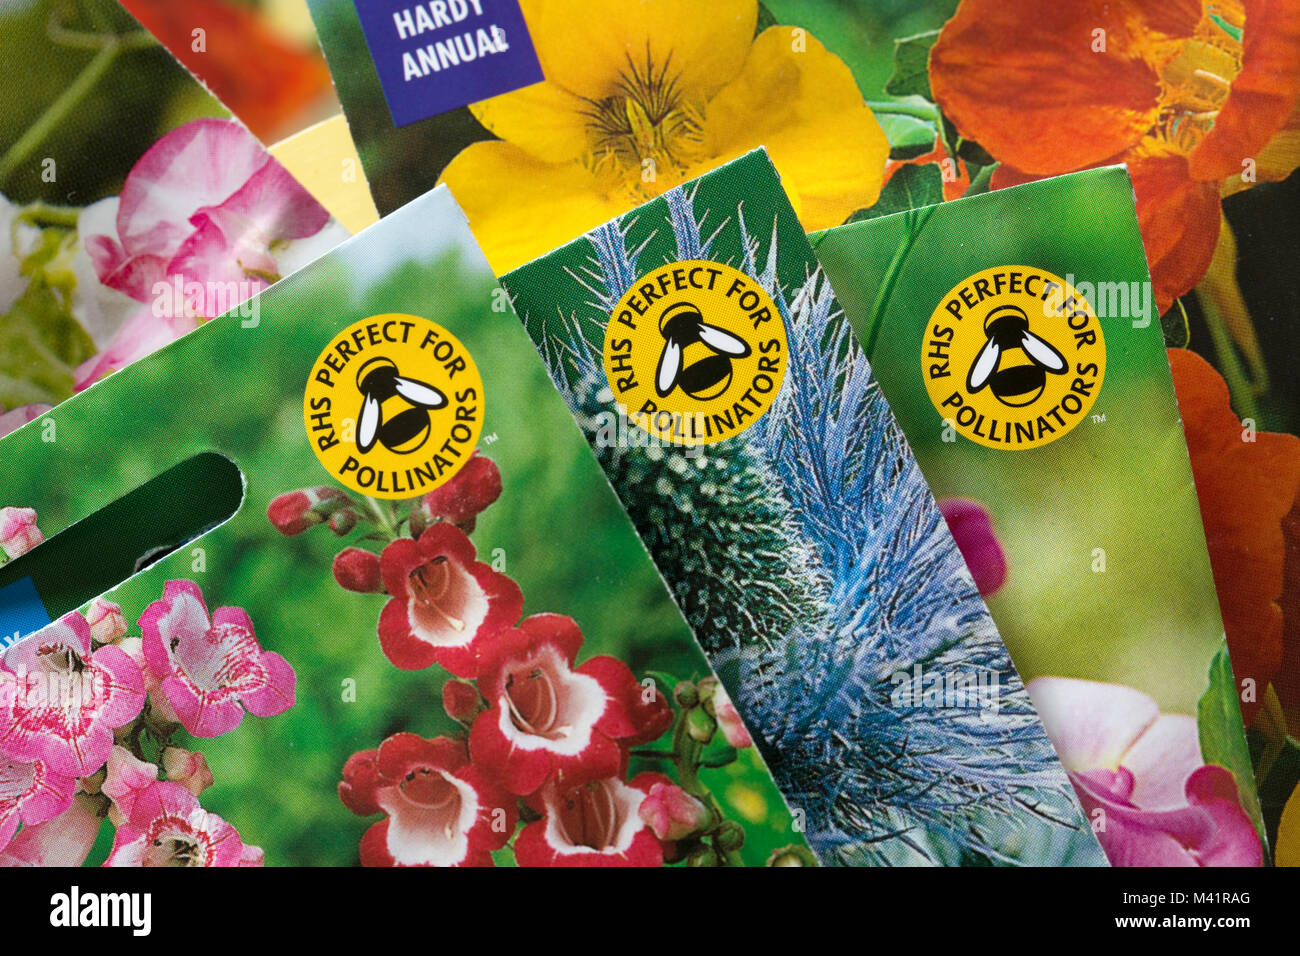 Colourful seed packets displaying RHS perfect for pollinators bee-friendly logo UK Stock Photo